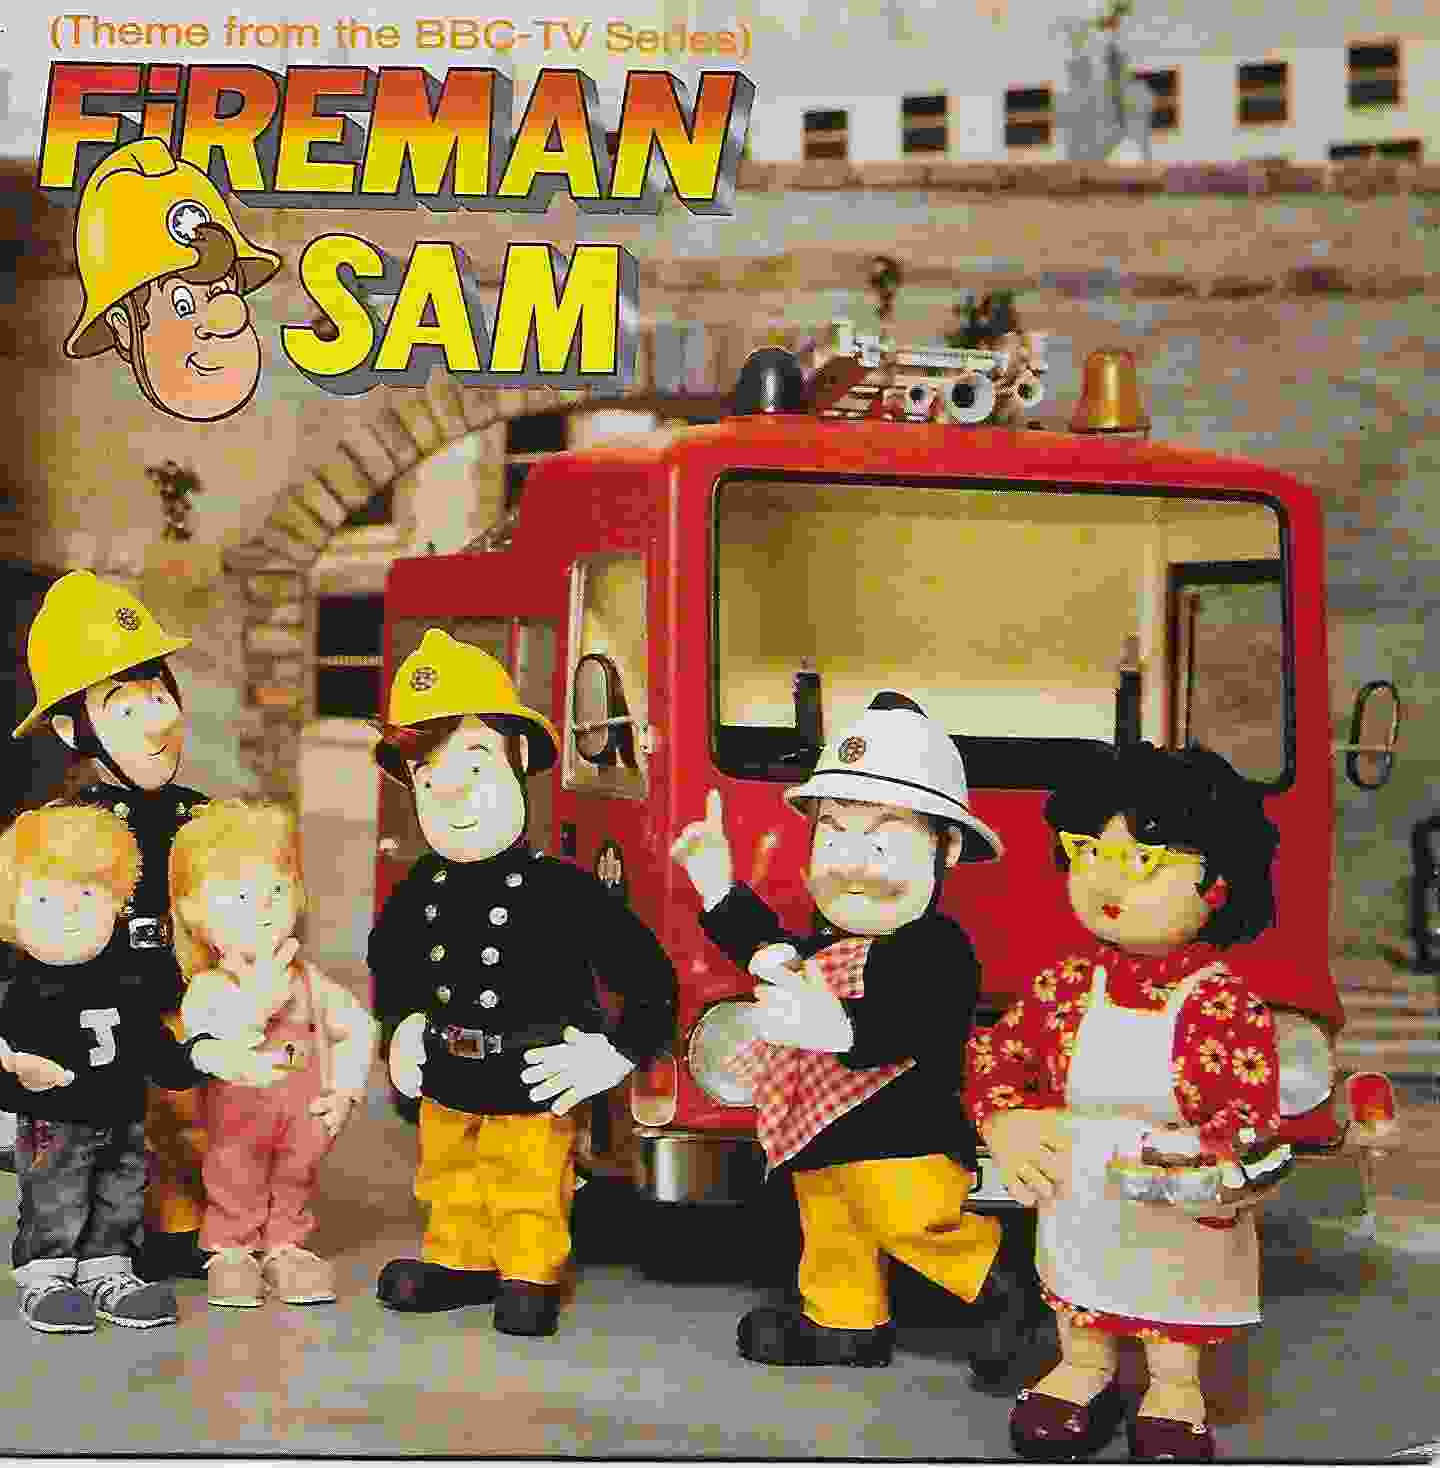 Picture of RESL 224 Fireman Sam by artist Maldwyn Pope from the BBC records and Tapes library